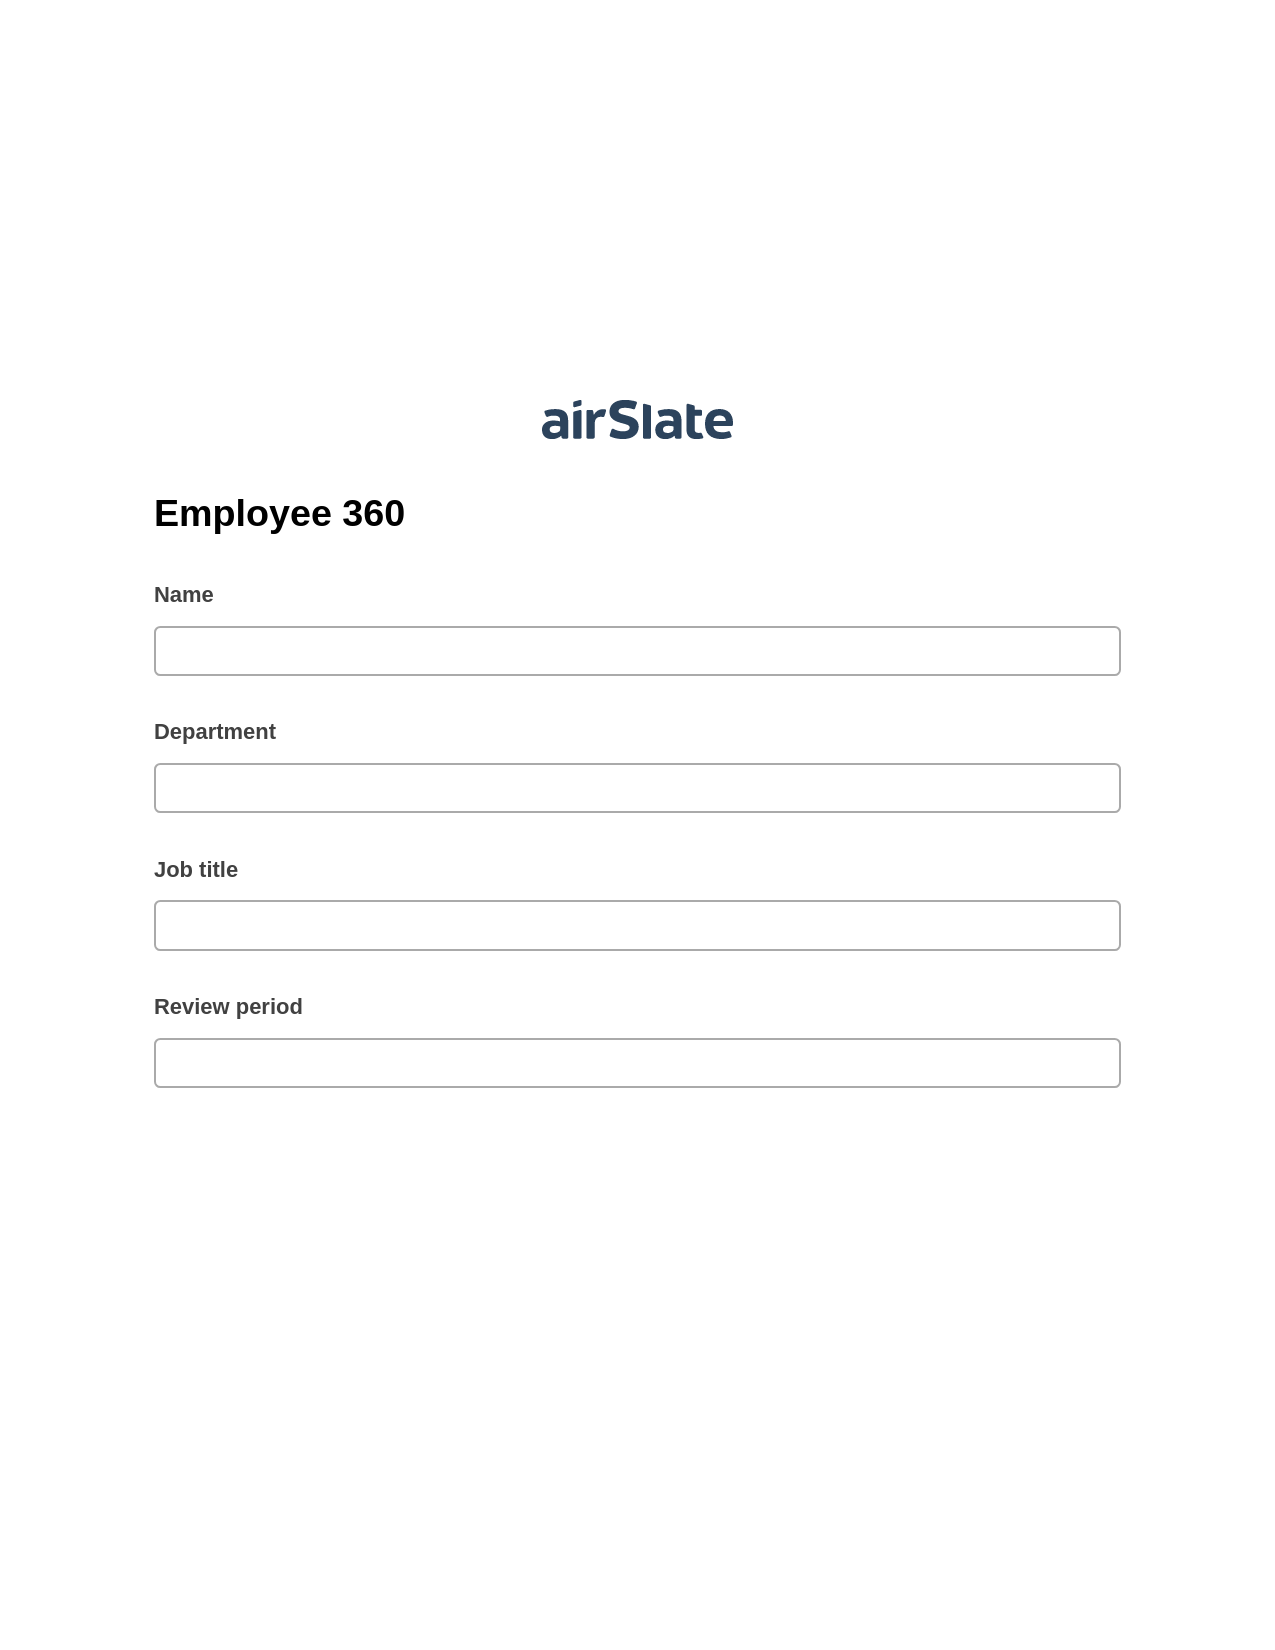 Employee 360 Pre-fill from CSV File Bot, Hide Signatures Bot, Archive to SharePoint Folder Bot